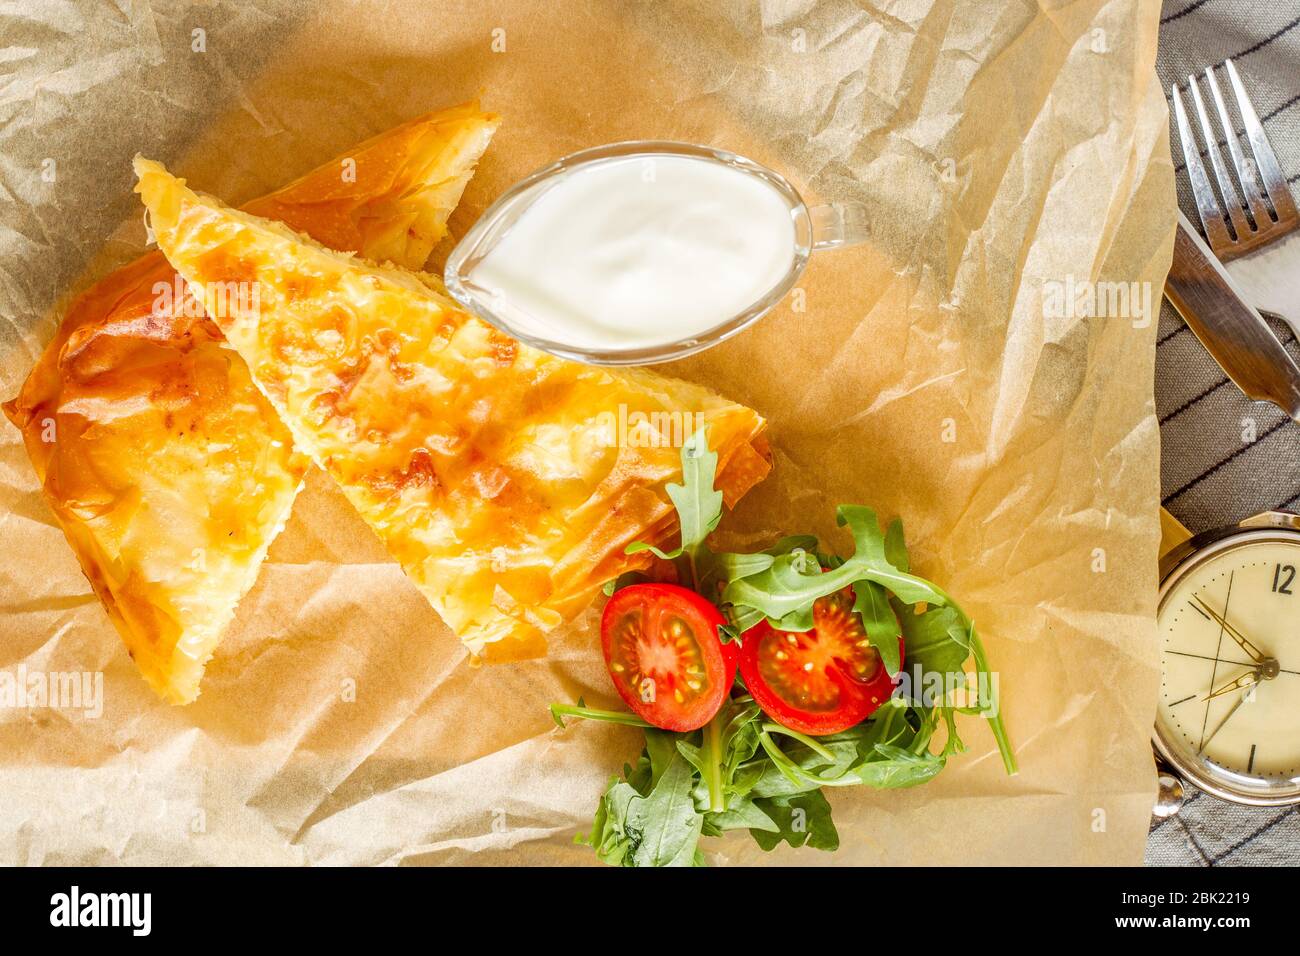 Cheese pie served with bowl of yogurt and rocket salad. Stock Photo